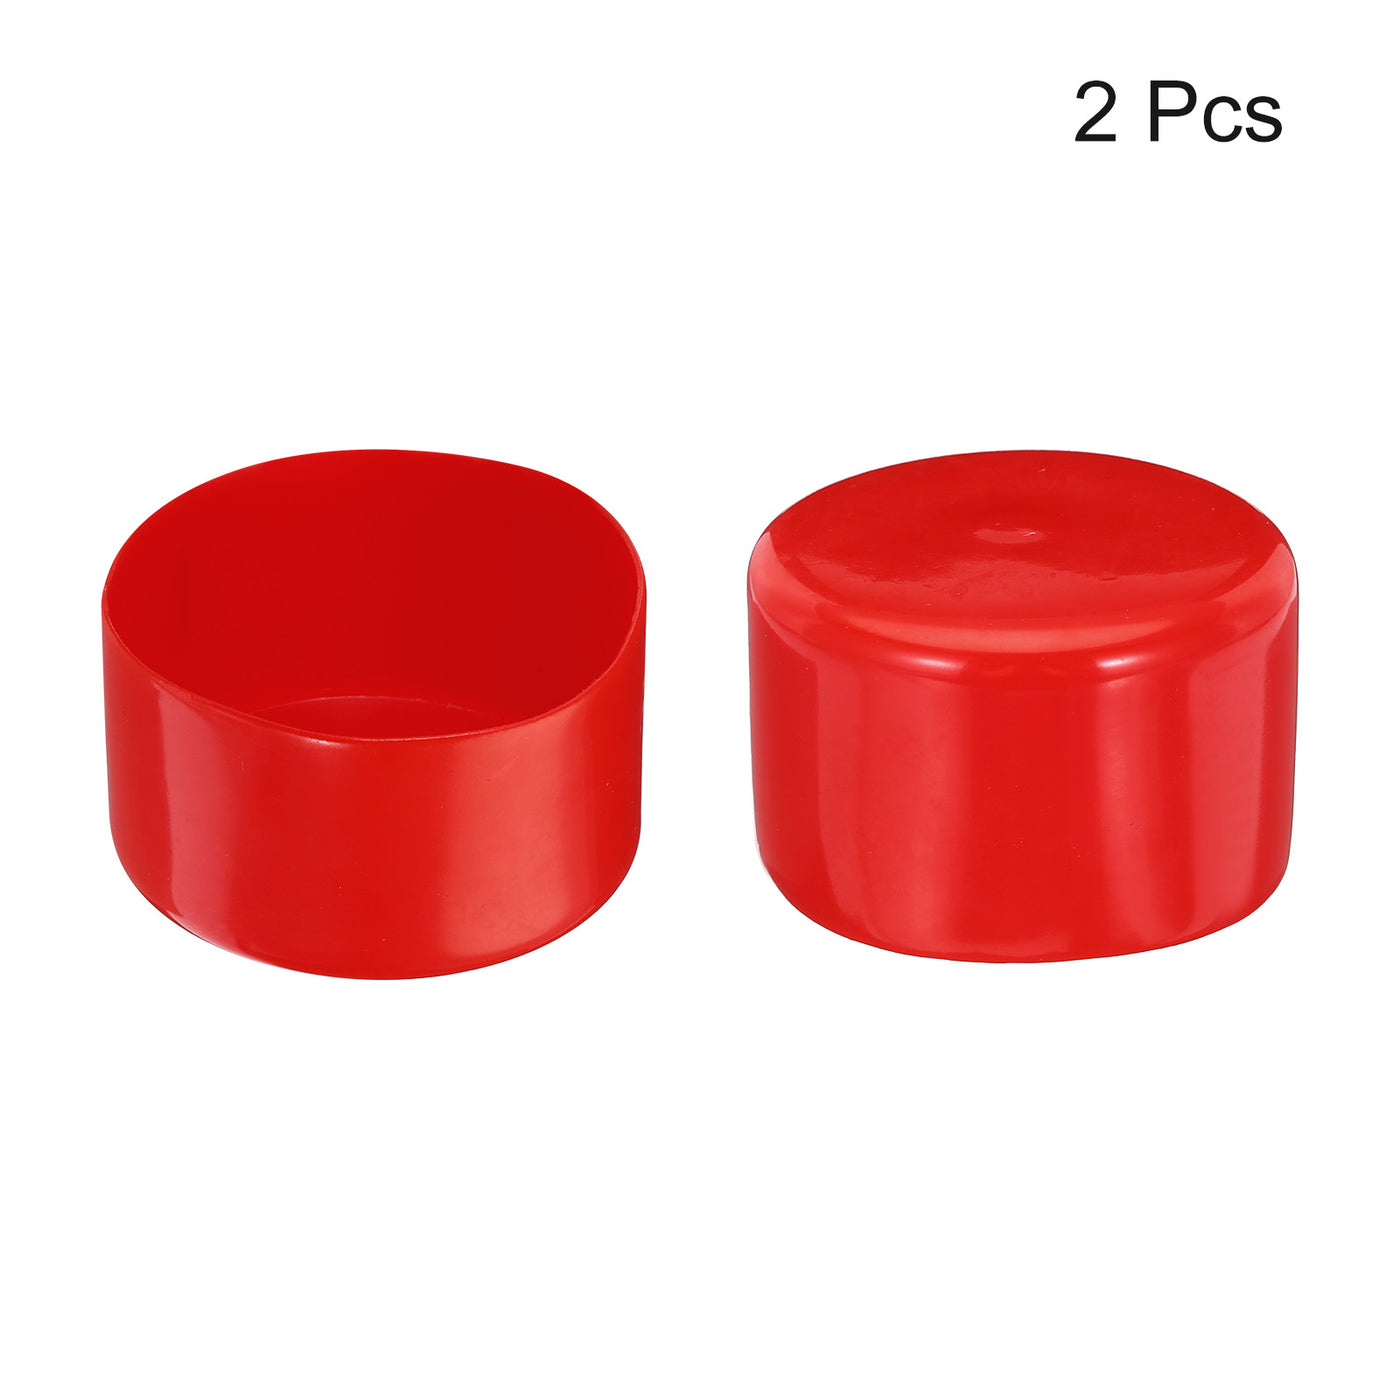 uxcell Uxcell 2pcs Rubber End Caps 75mm ID Vinyl Round Tube Bolt Cap Cover Screw Thread Protectors Red